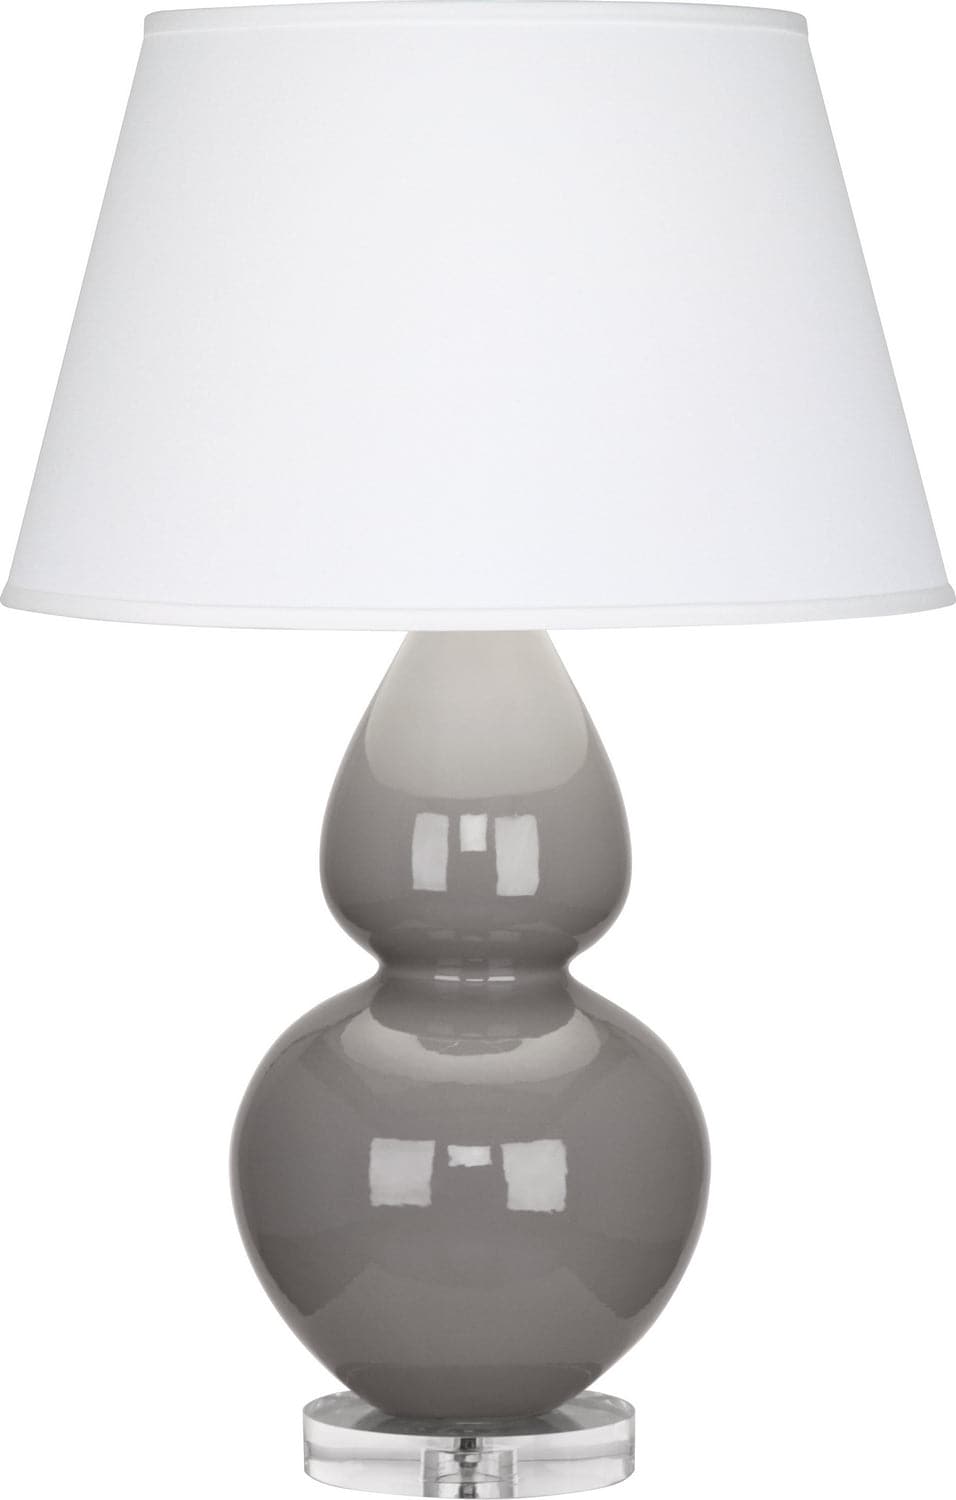 Robert Abbey - A750X - One Light Table Lamp - Double Gourd - Smoky Taupe Glazed w/Lucite Base